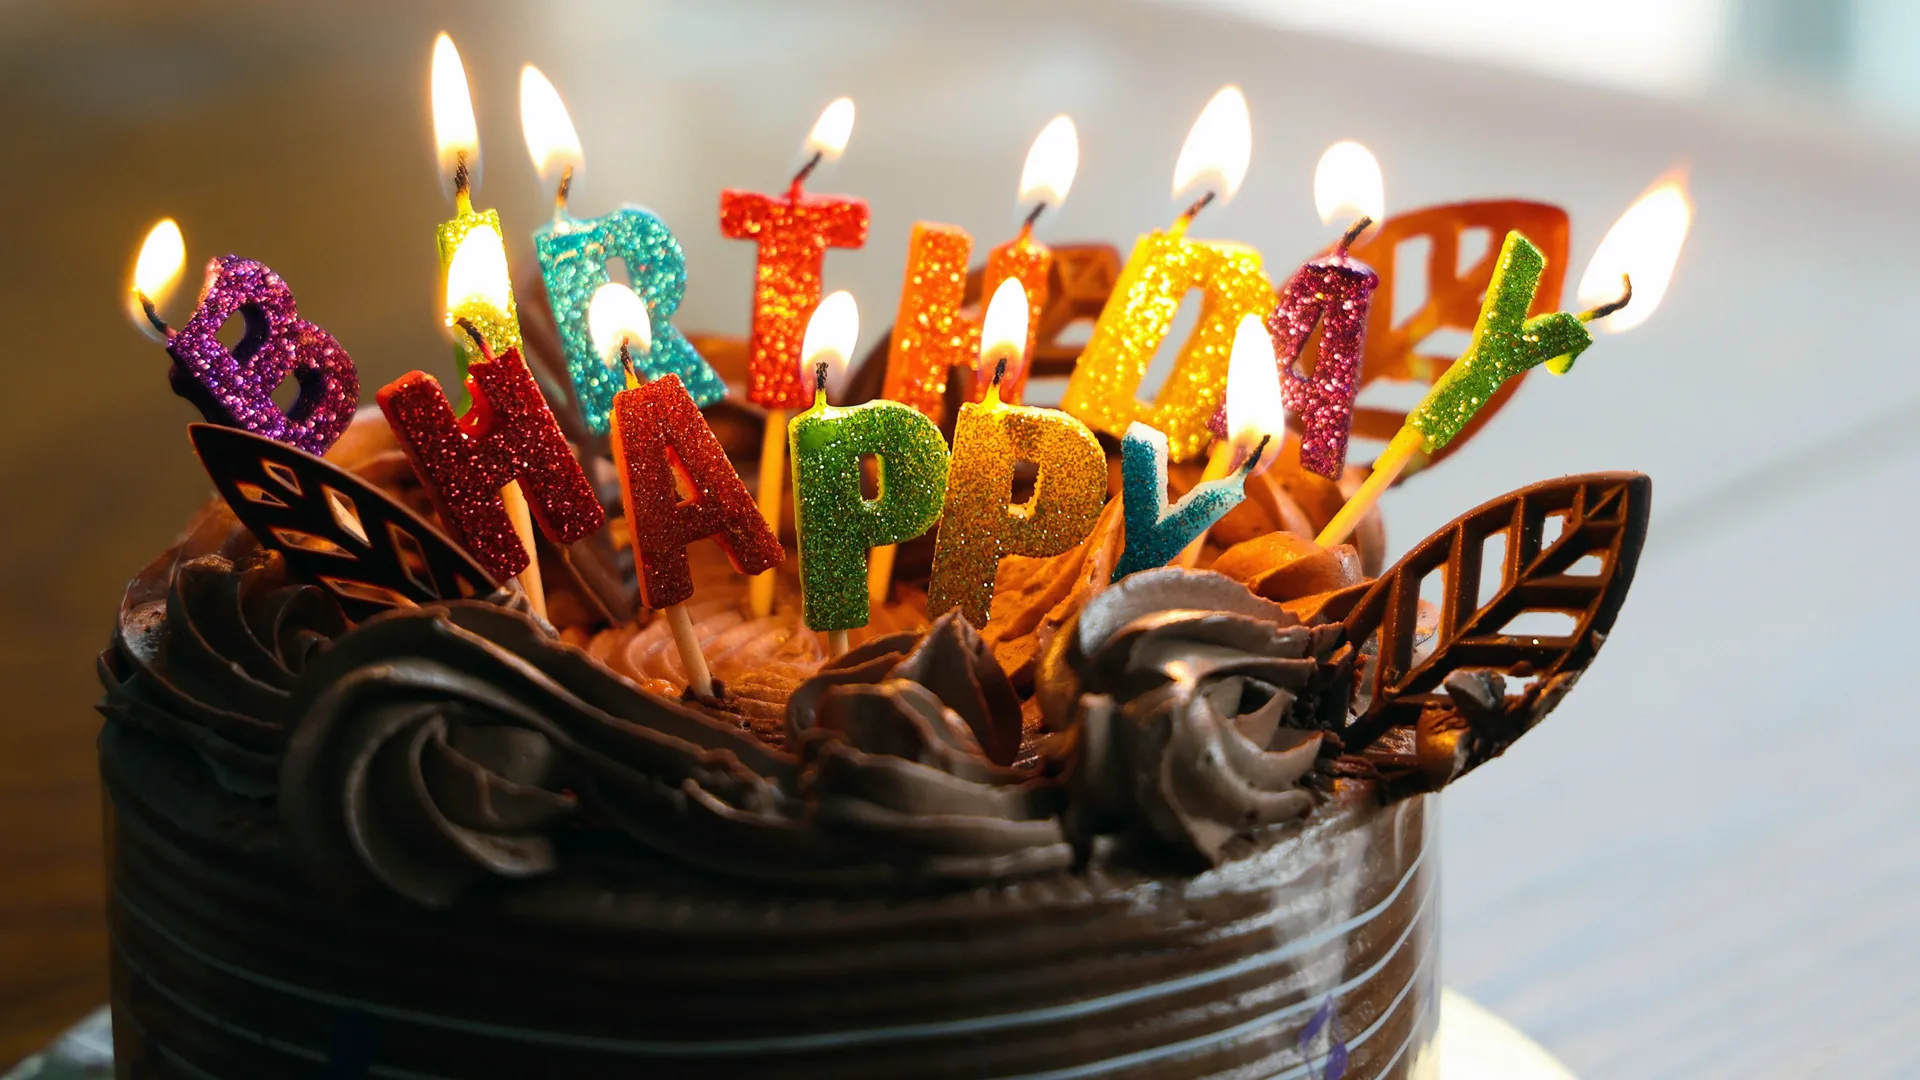 A photograph of a birthday cake with colourful glitter candles